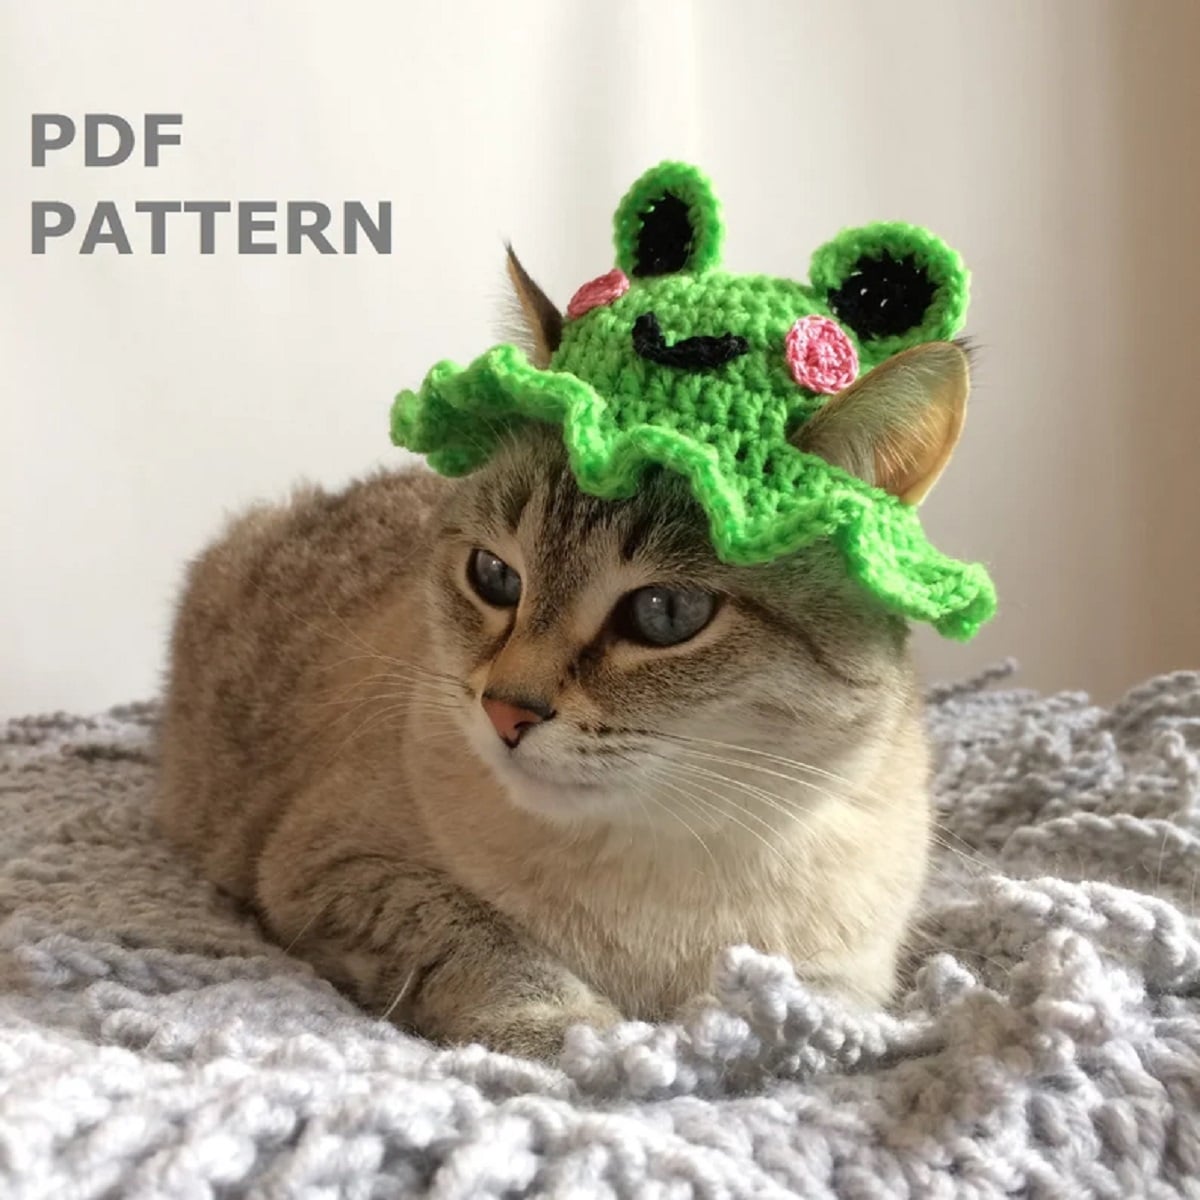 Gray cat sitting on a blanket wearing a small green crochet hat with a frog’s face and ears on top.